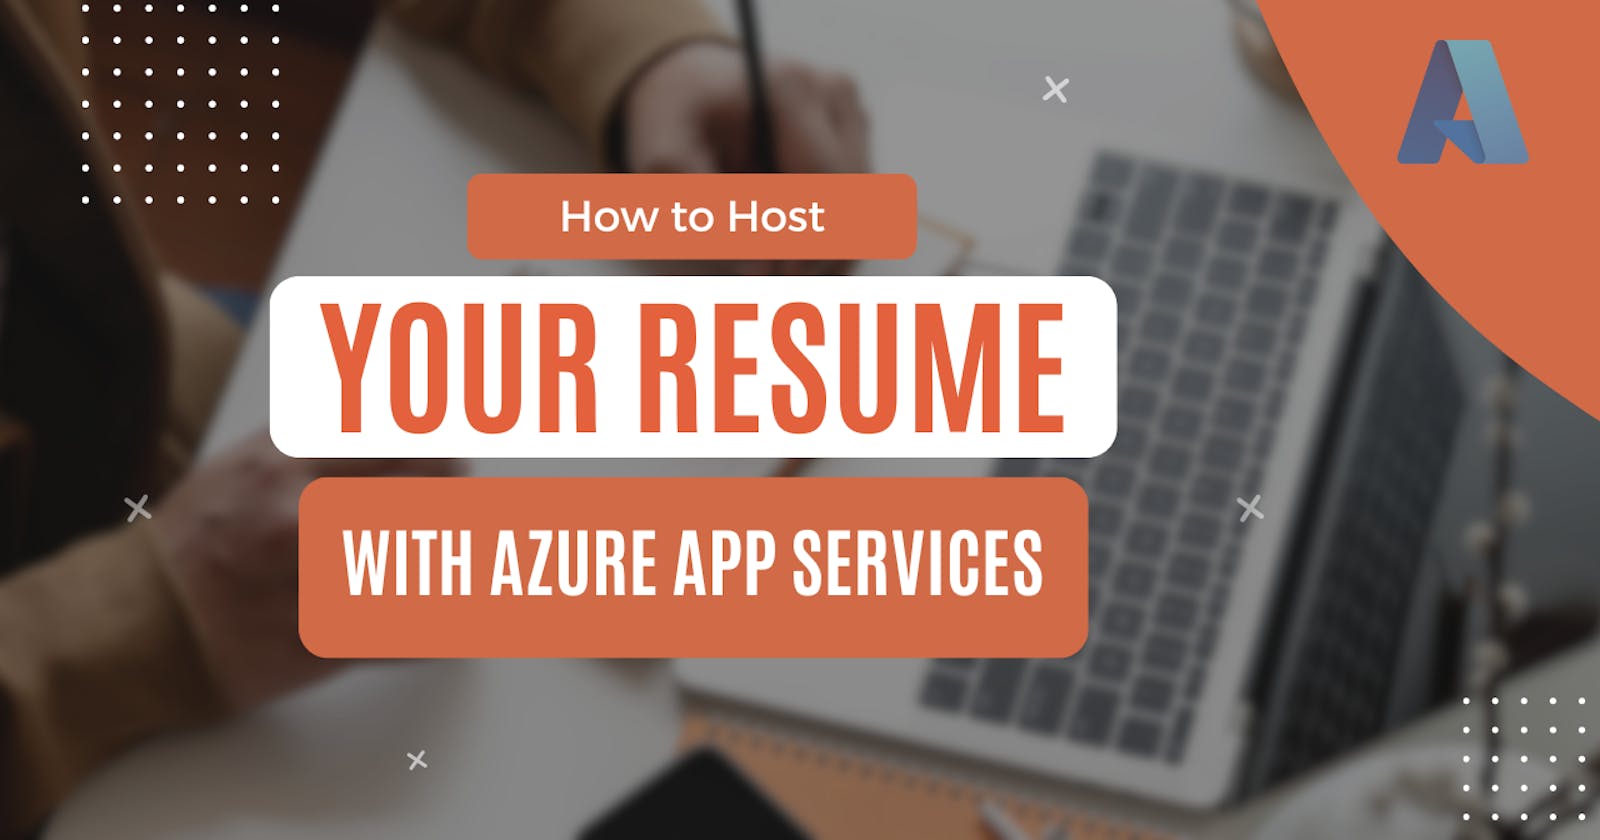 Host your Resume with Azure App Services